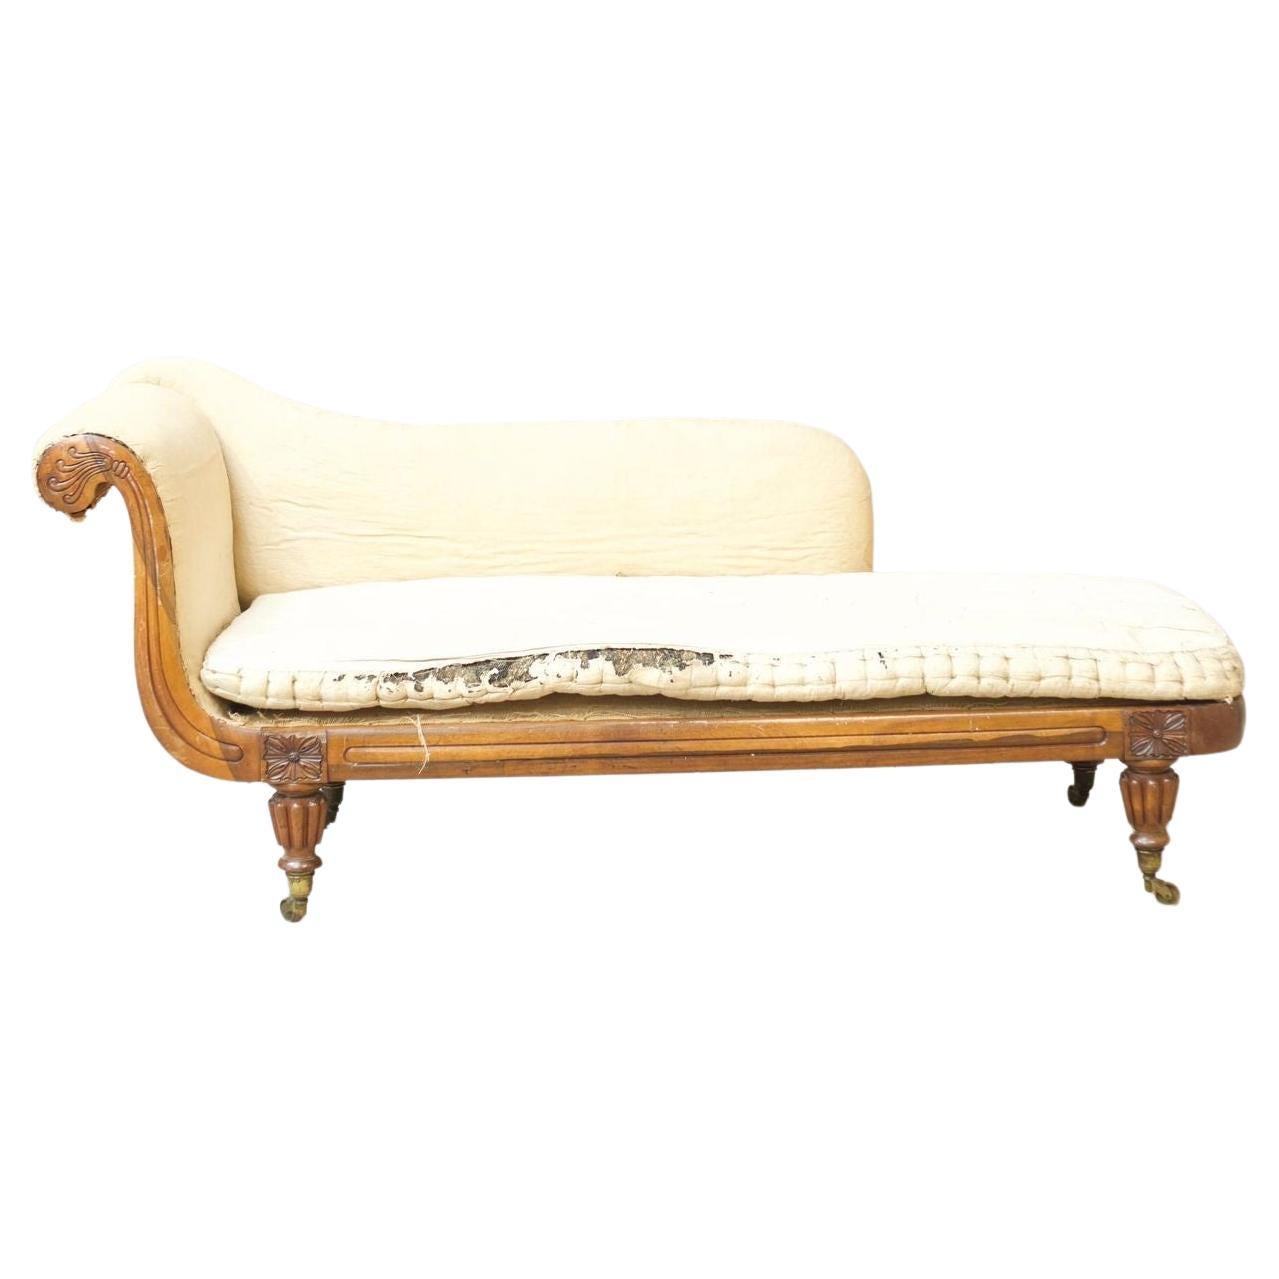 Regency Period Rosewood Chaise Lounge